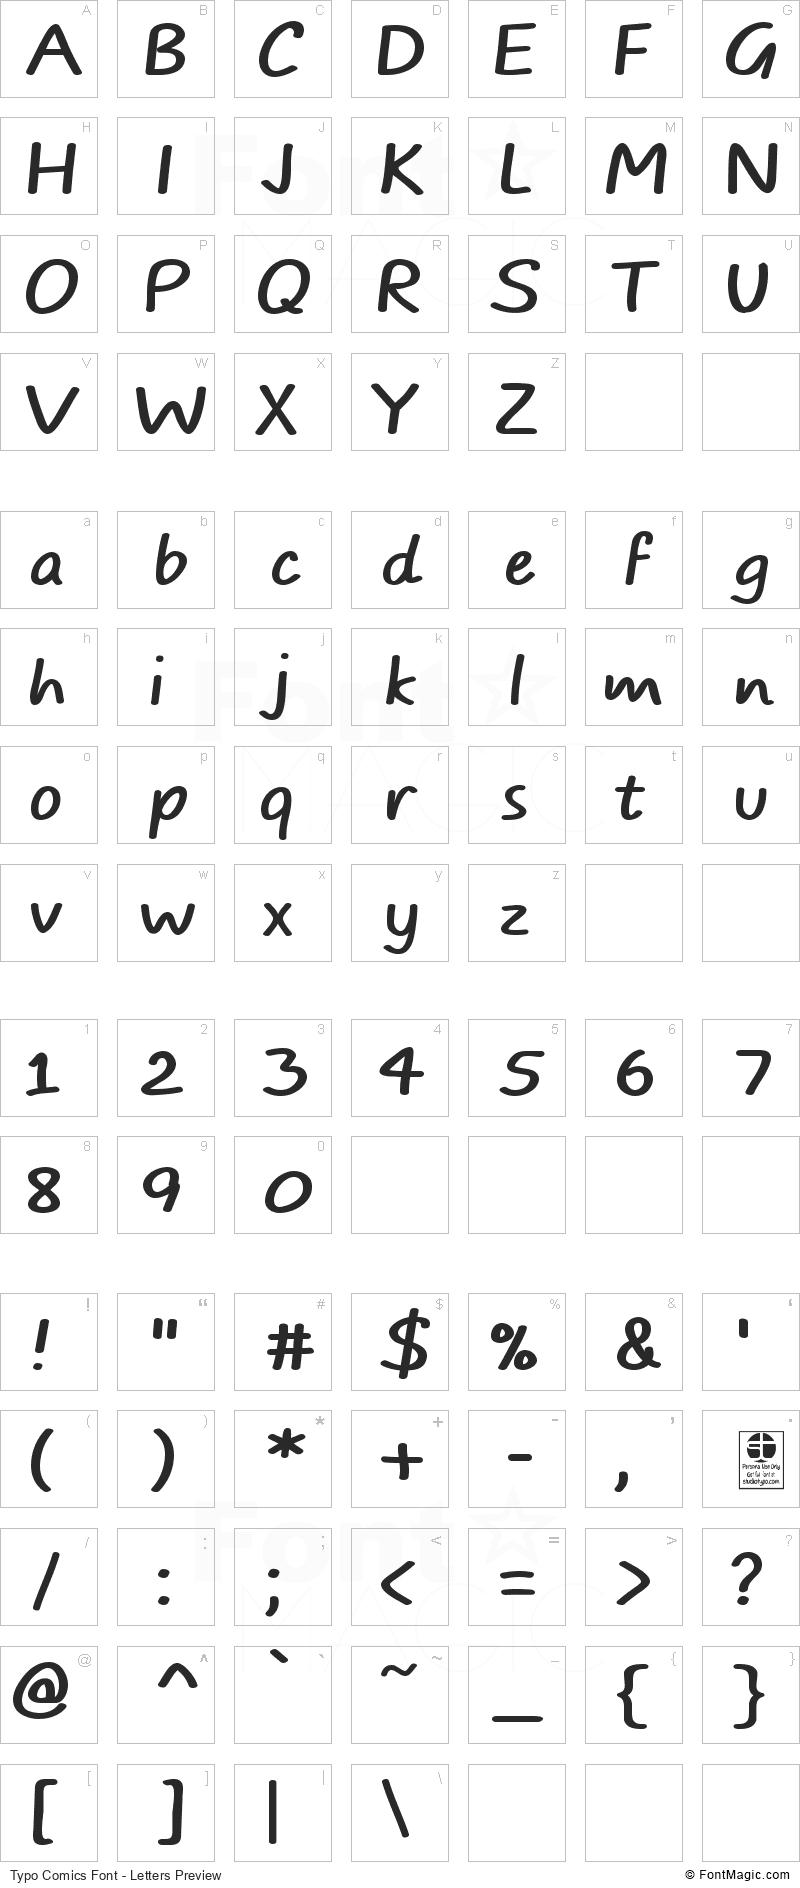 Typo Comics Font - All Latters Preview Chart